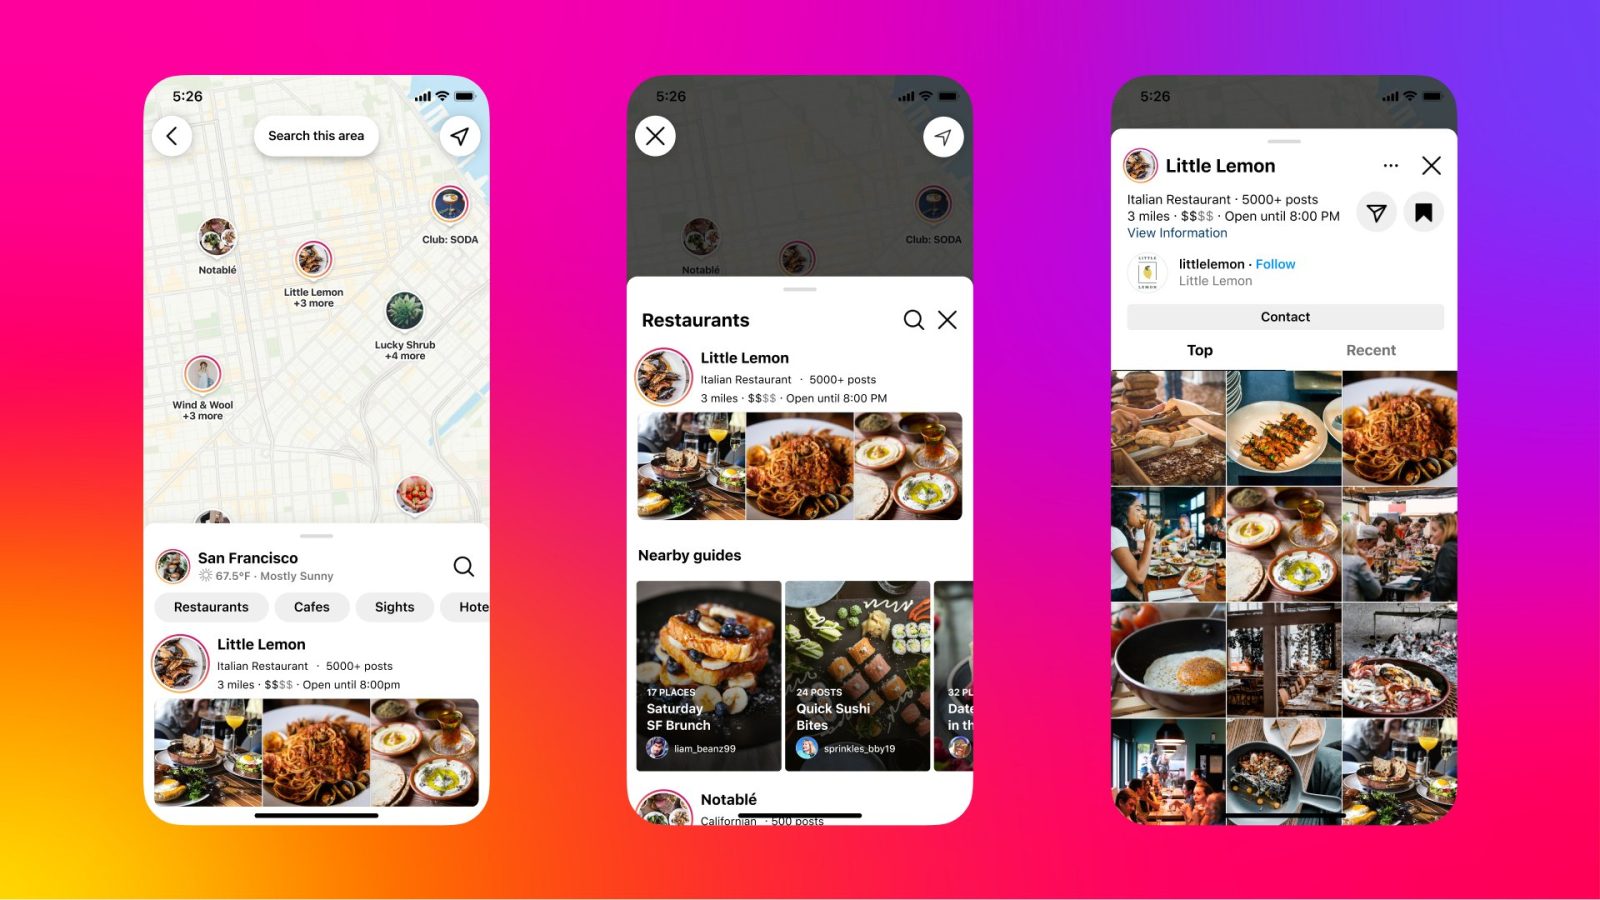 Instagram rolling out new map experience to help users discover more places